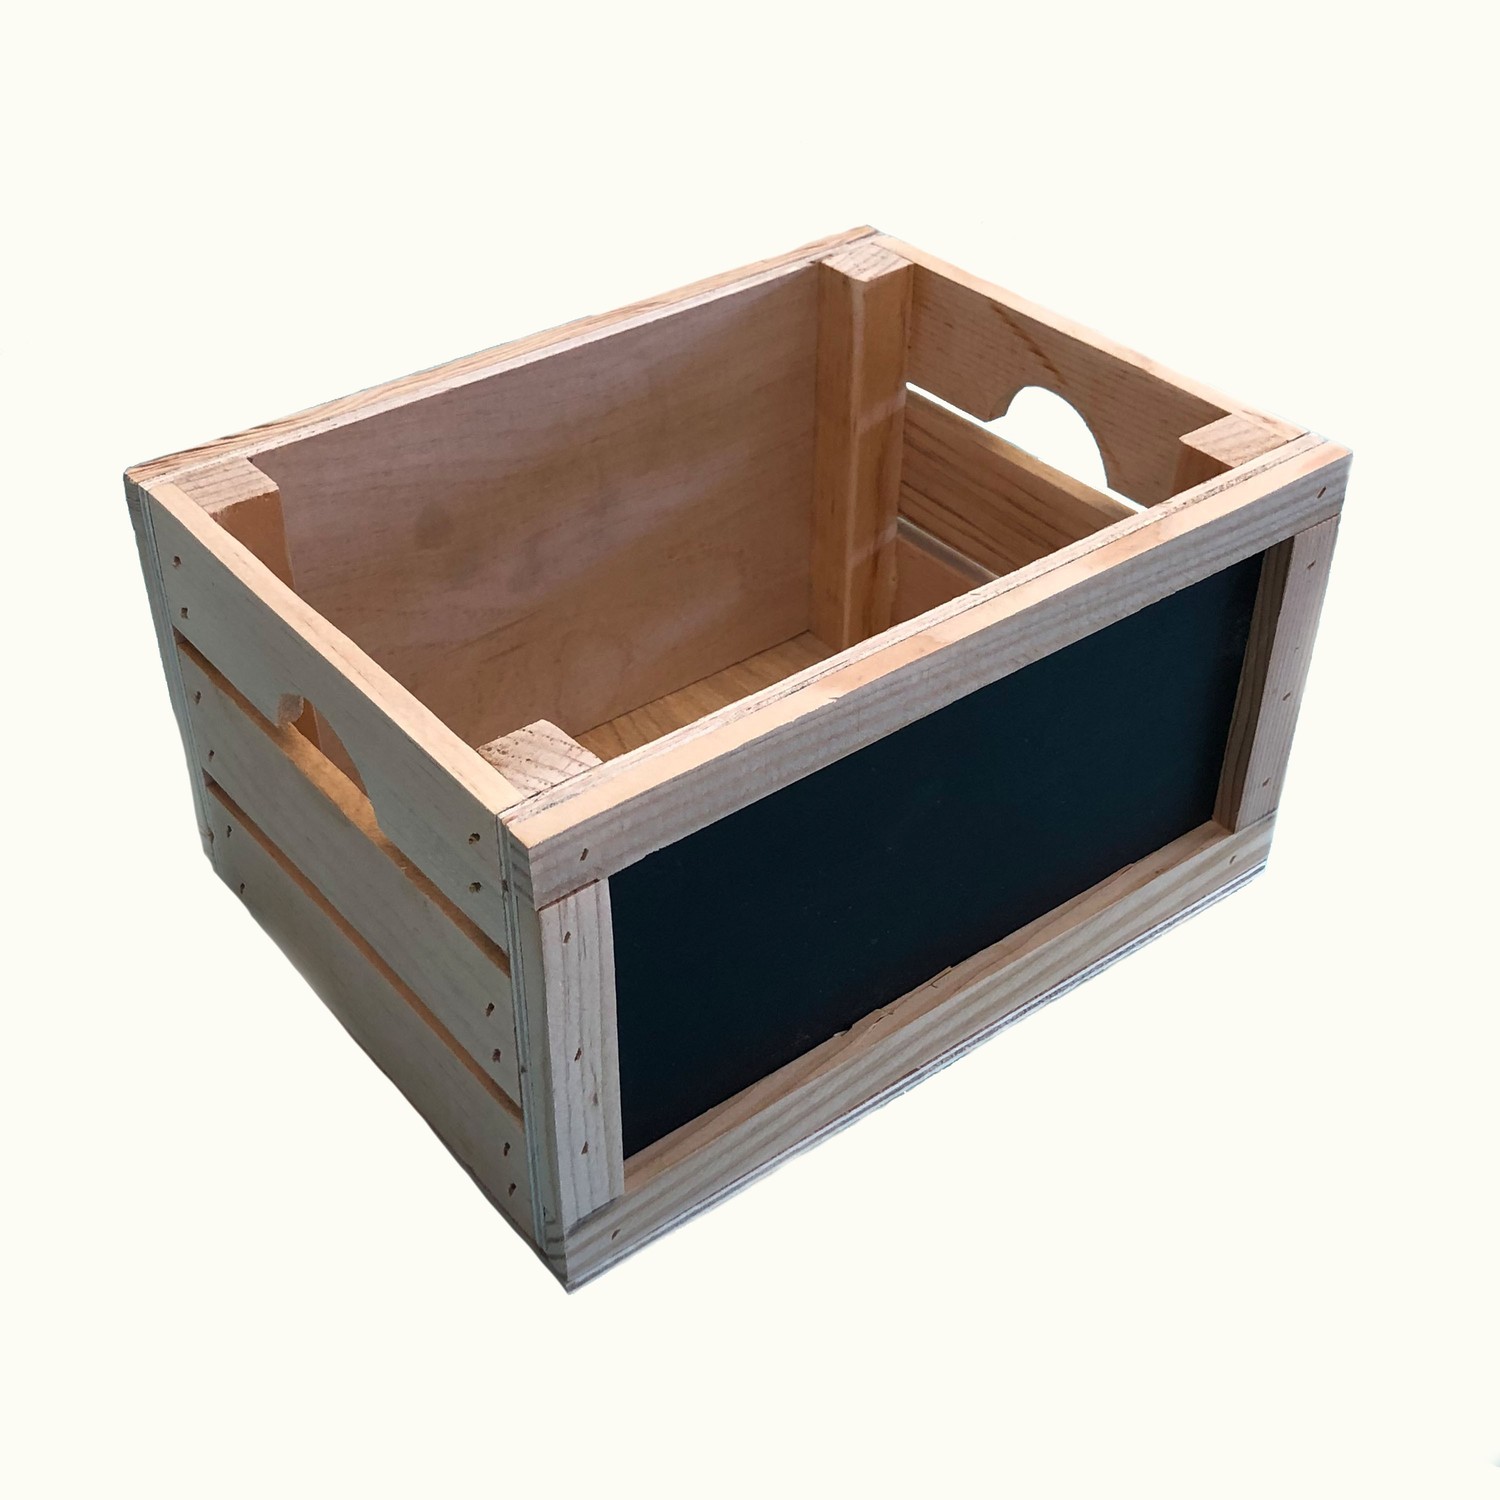 12" Organic Natural Wood Stacking Milk Crate with Chalkboard Side